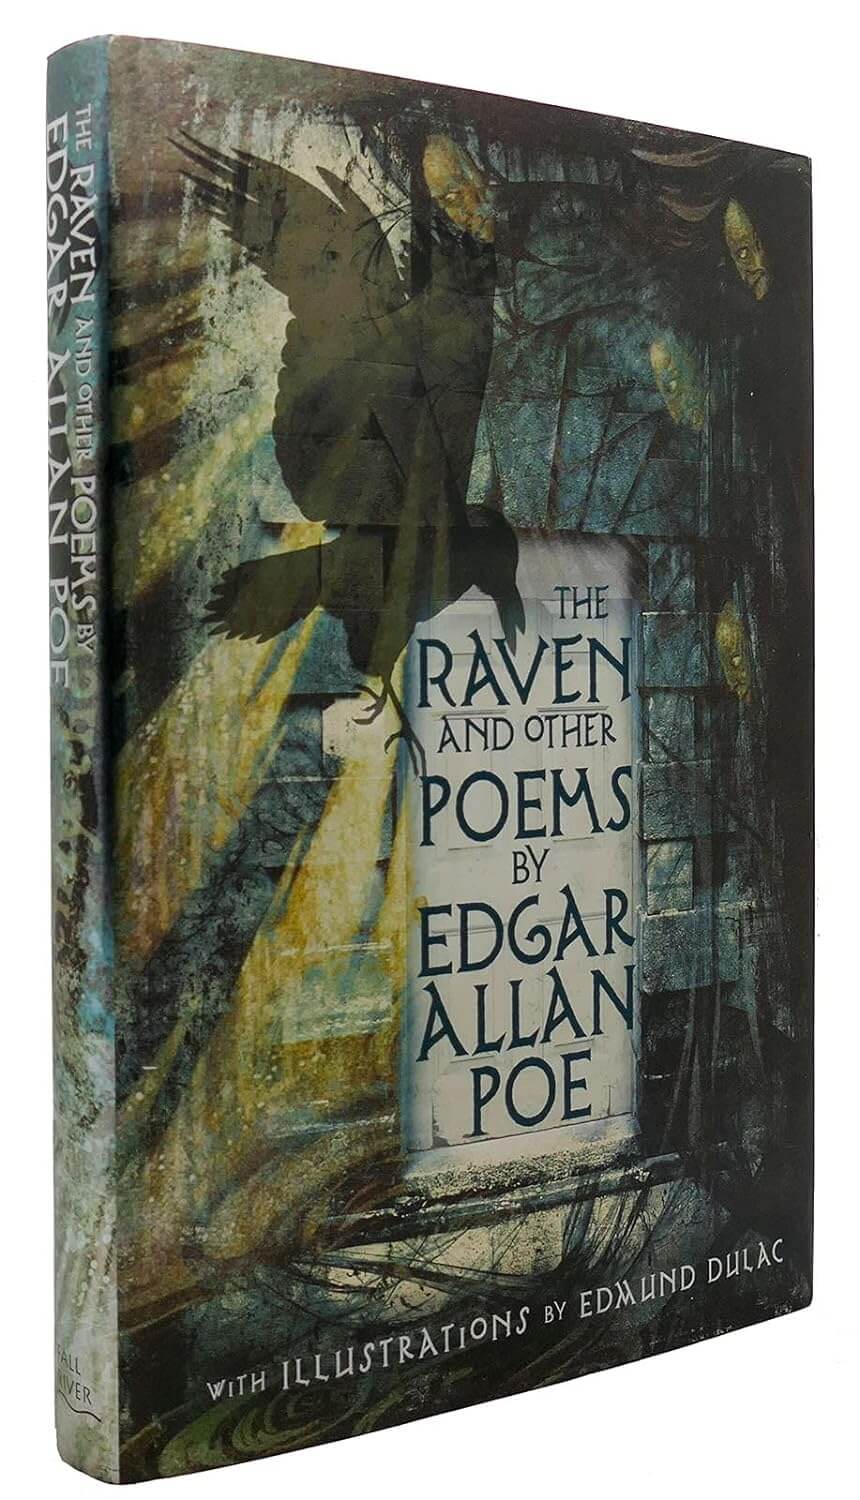 “The Raven and Other Poems” by Edgar Allen Poe